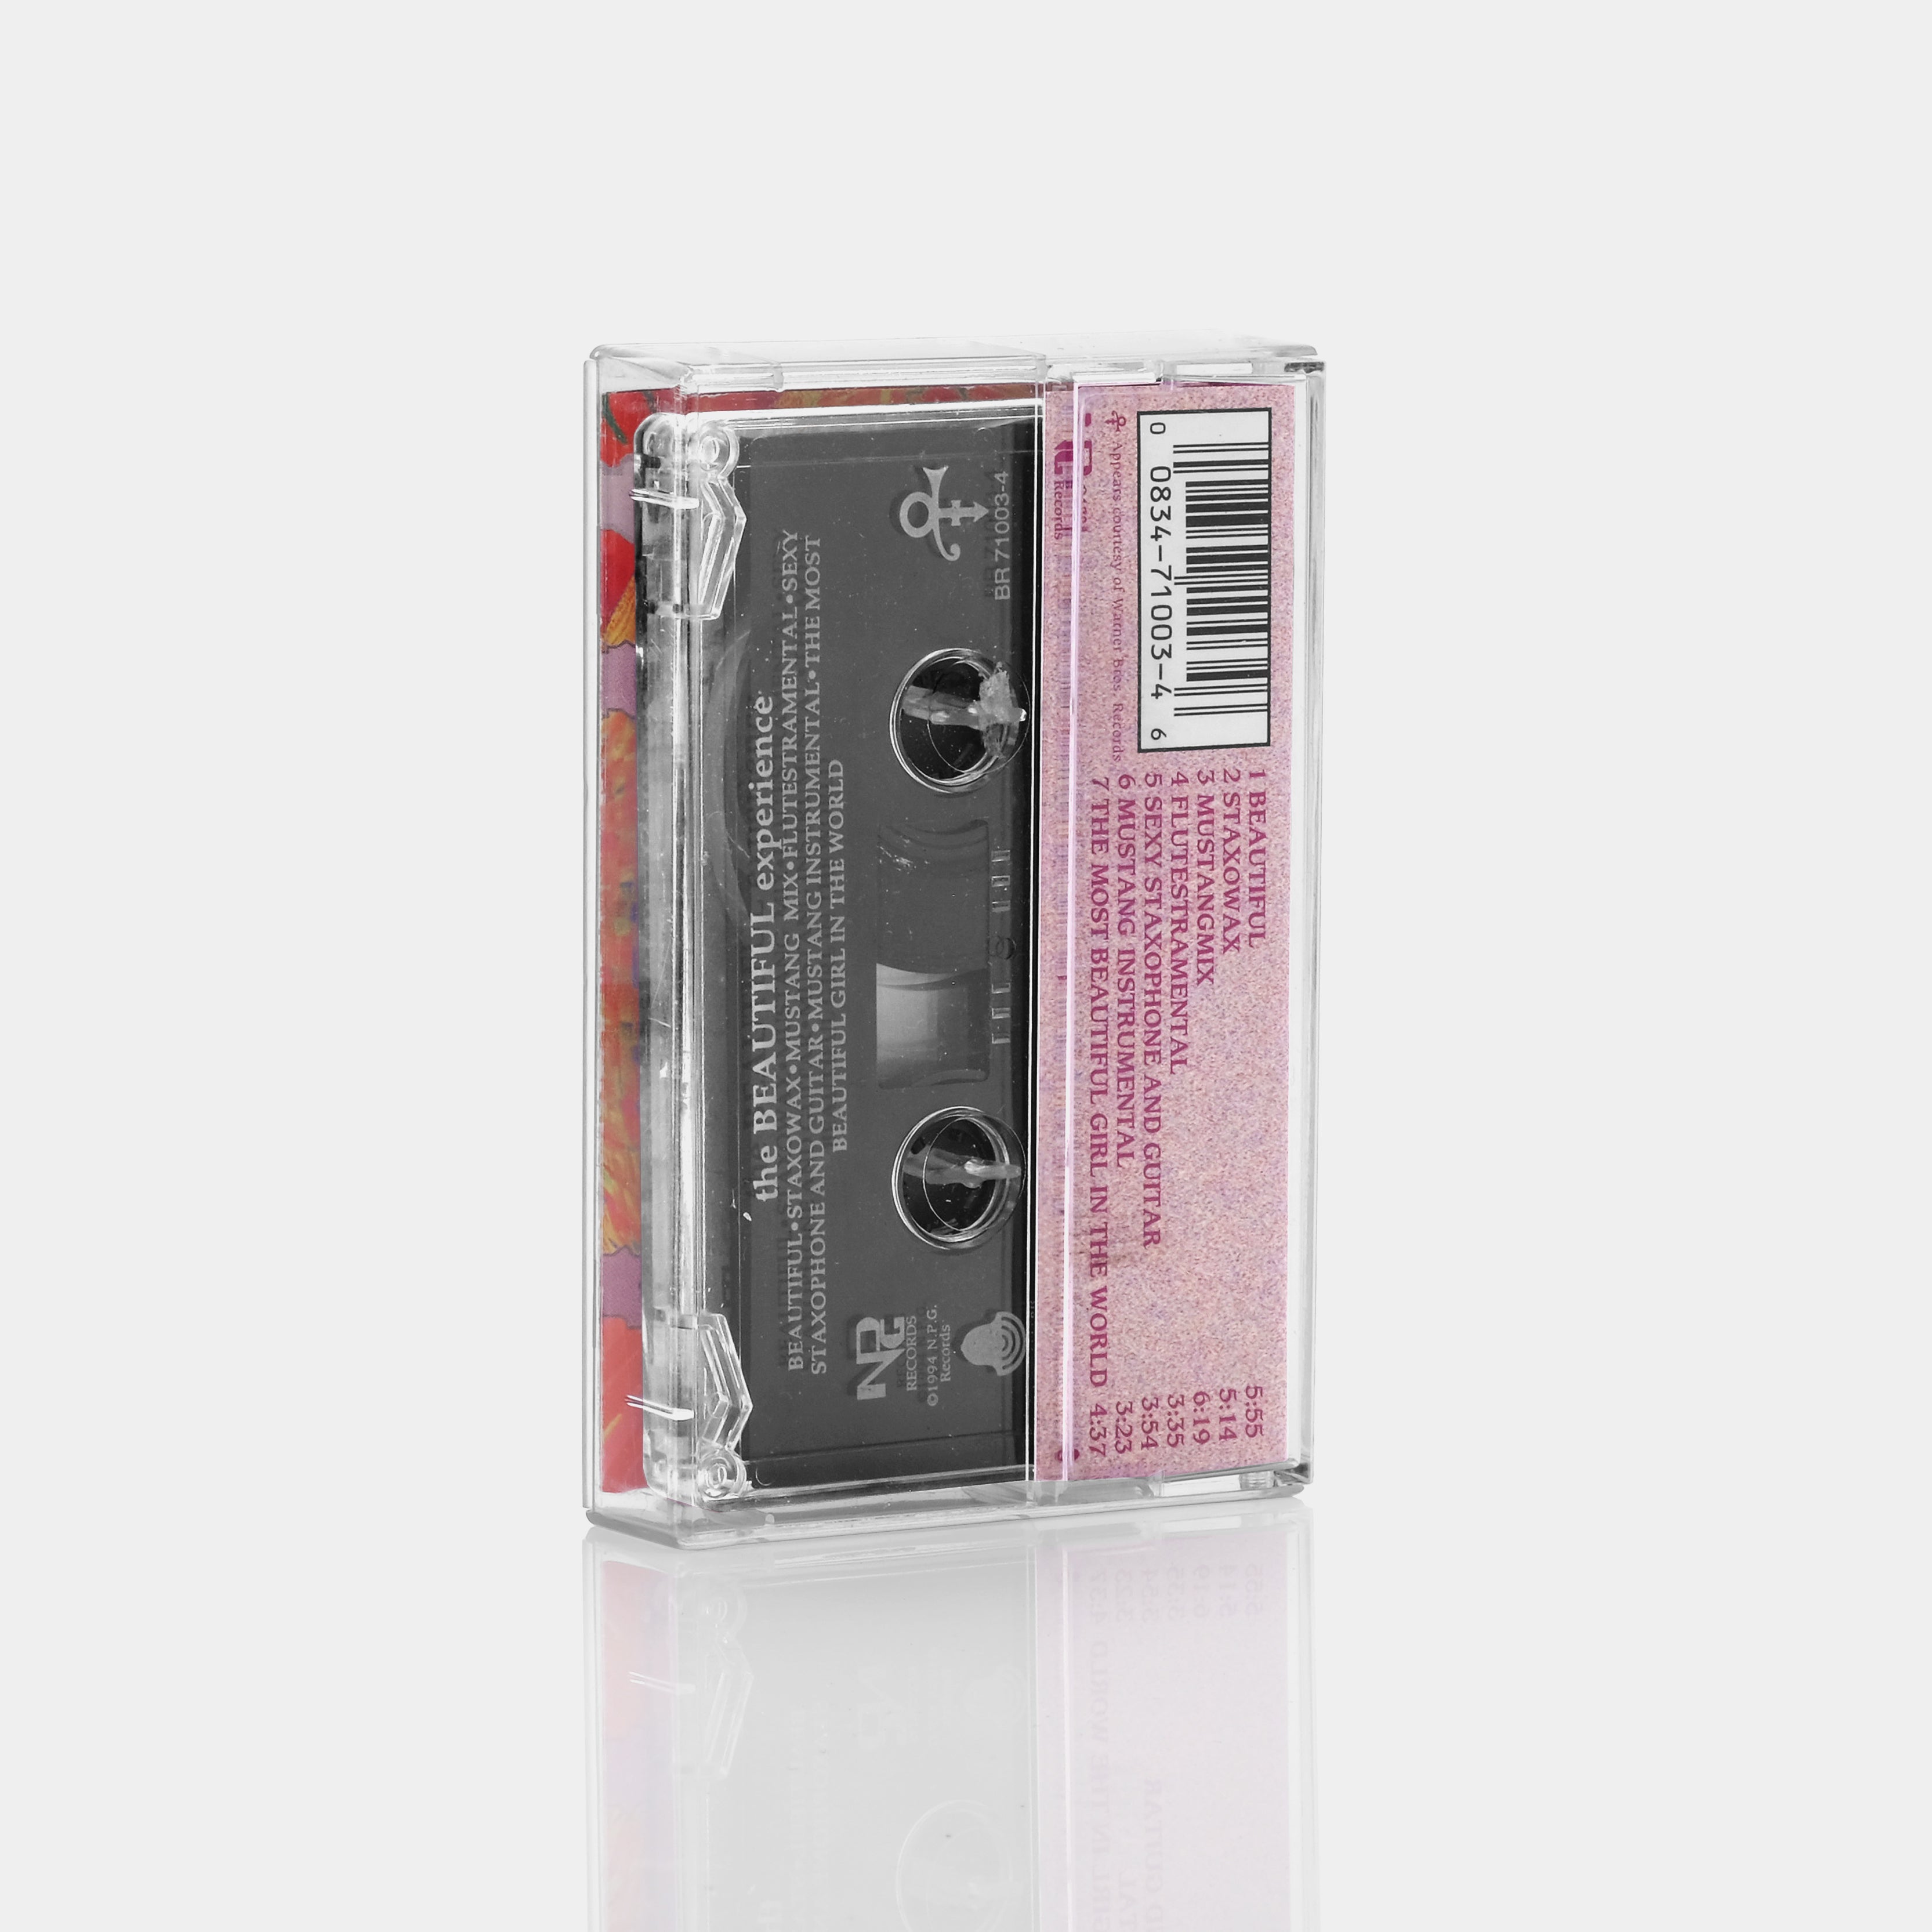 The Artist (Formally Known As Prince) - The Beautiful Experience Cassette Tape